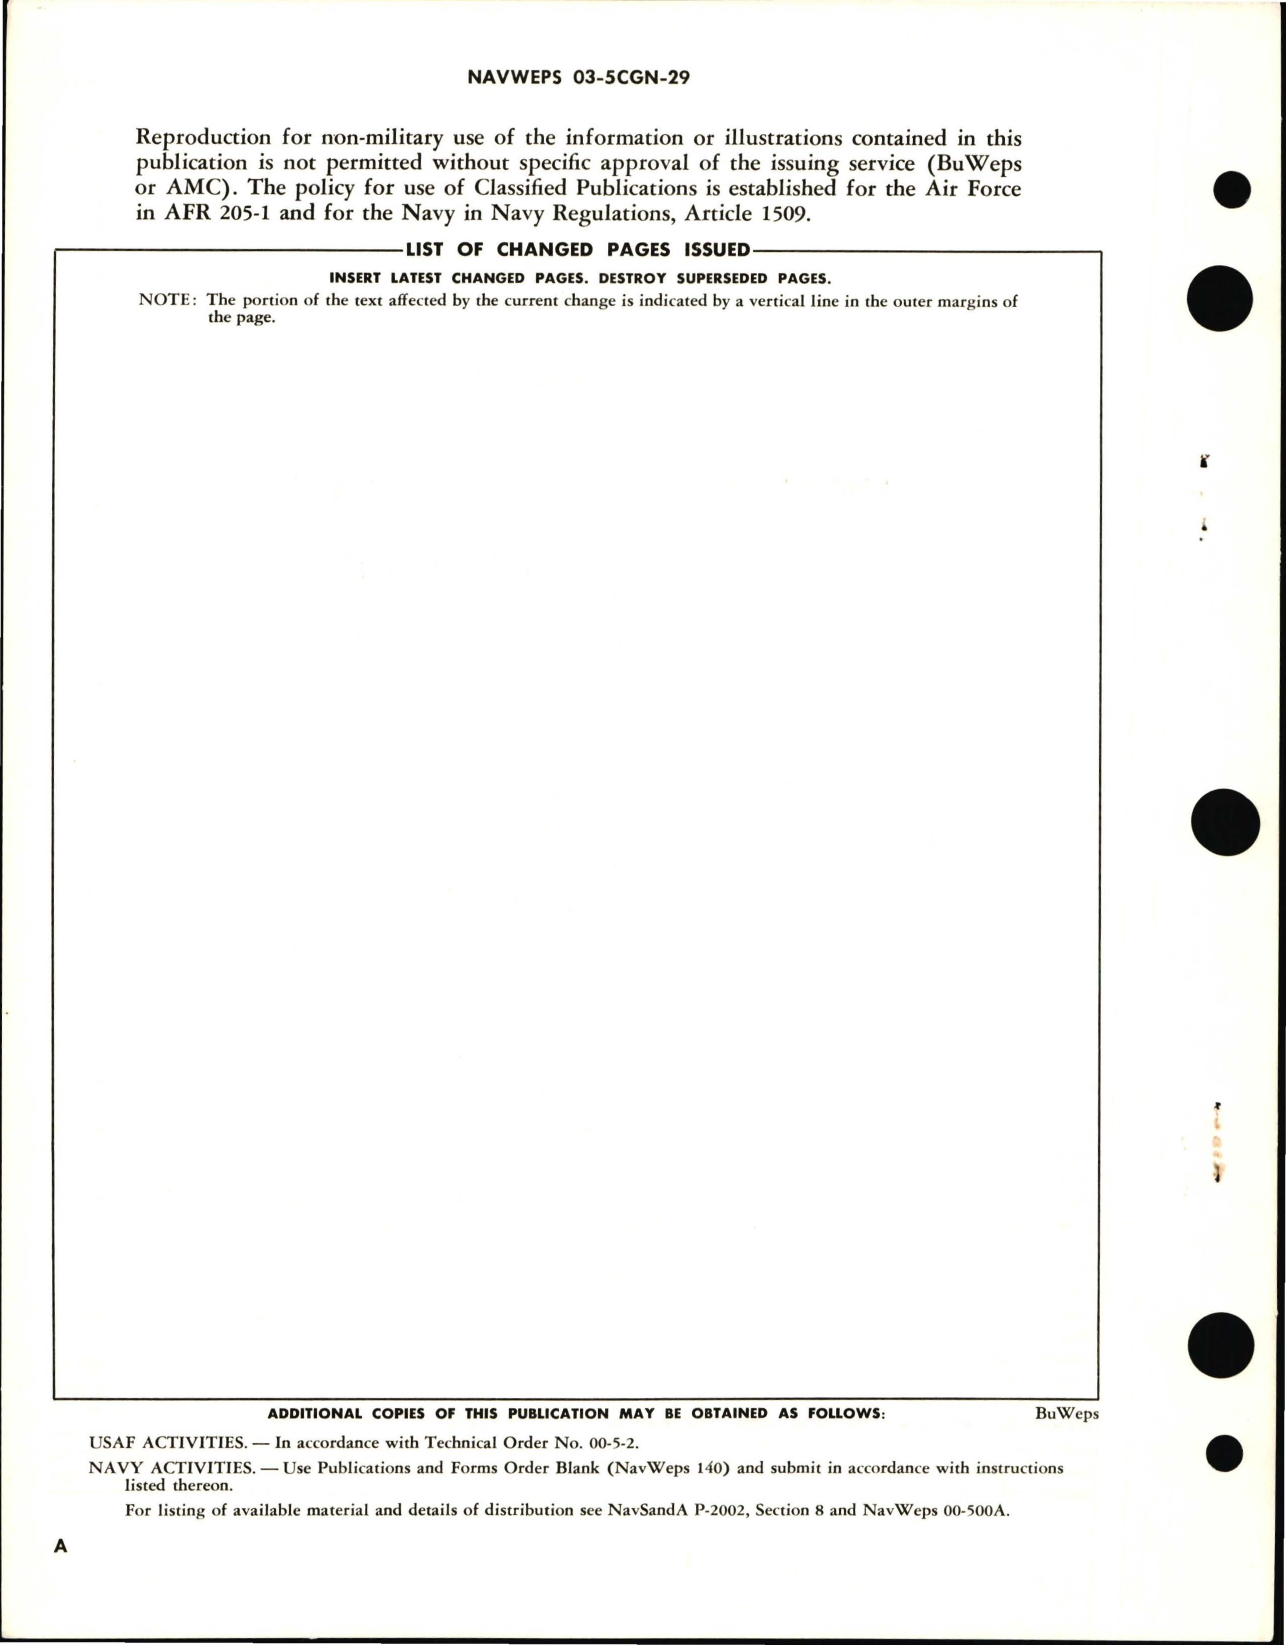 Sample page 2 from AirCorps Library document: Overhaul Instructions for Hydraulic Flight Control, Vertical Stabilizer Actuator Assembly - Part 247-58715-31 and 247-58715-41